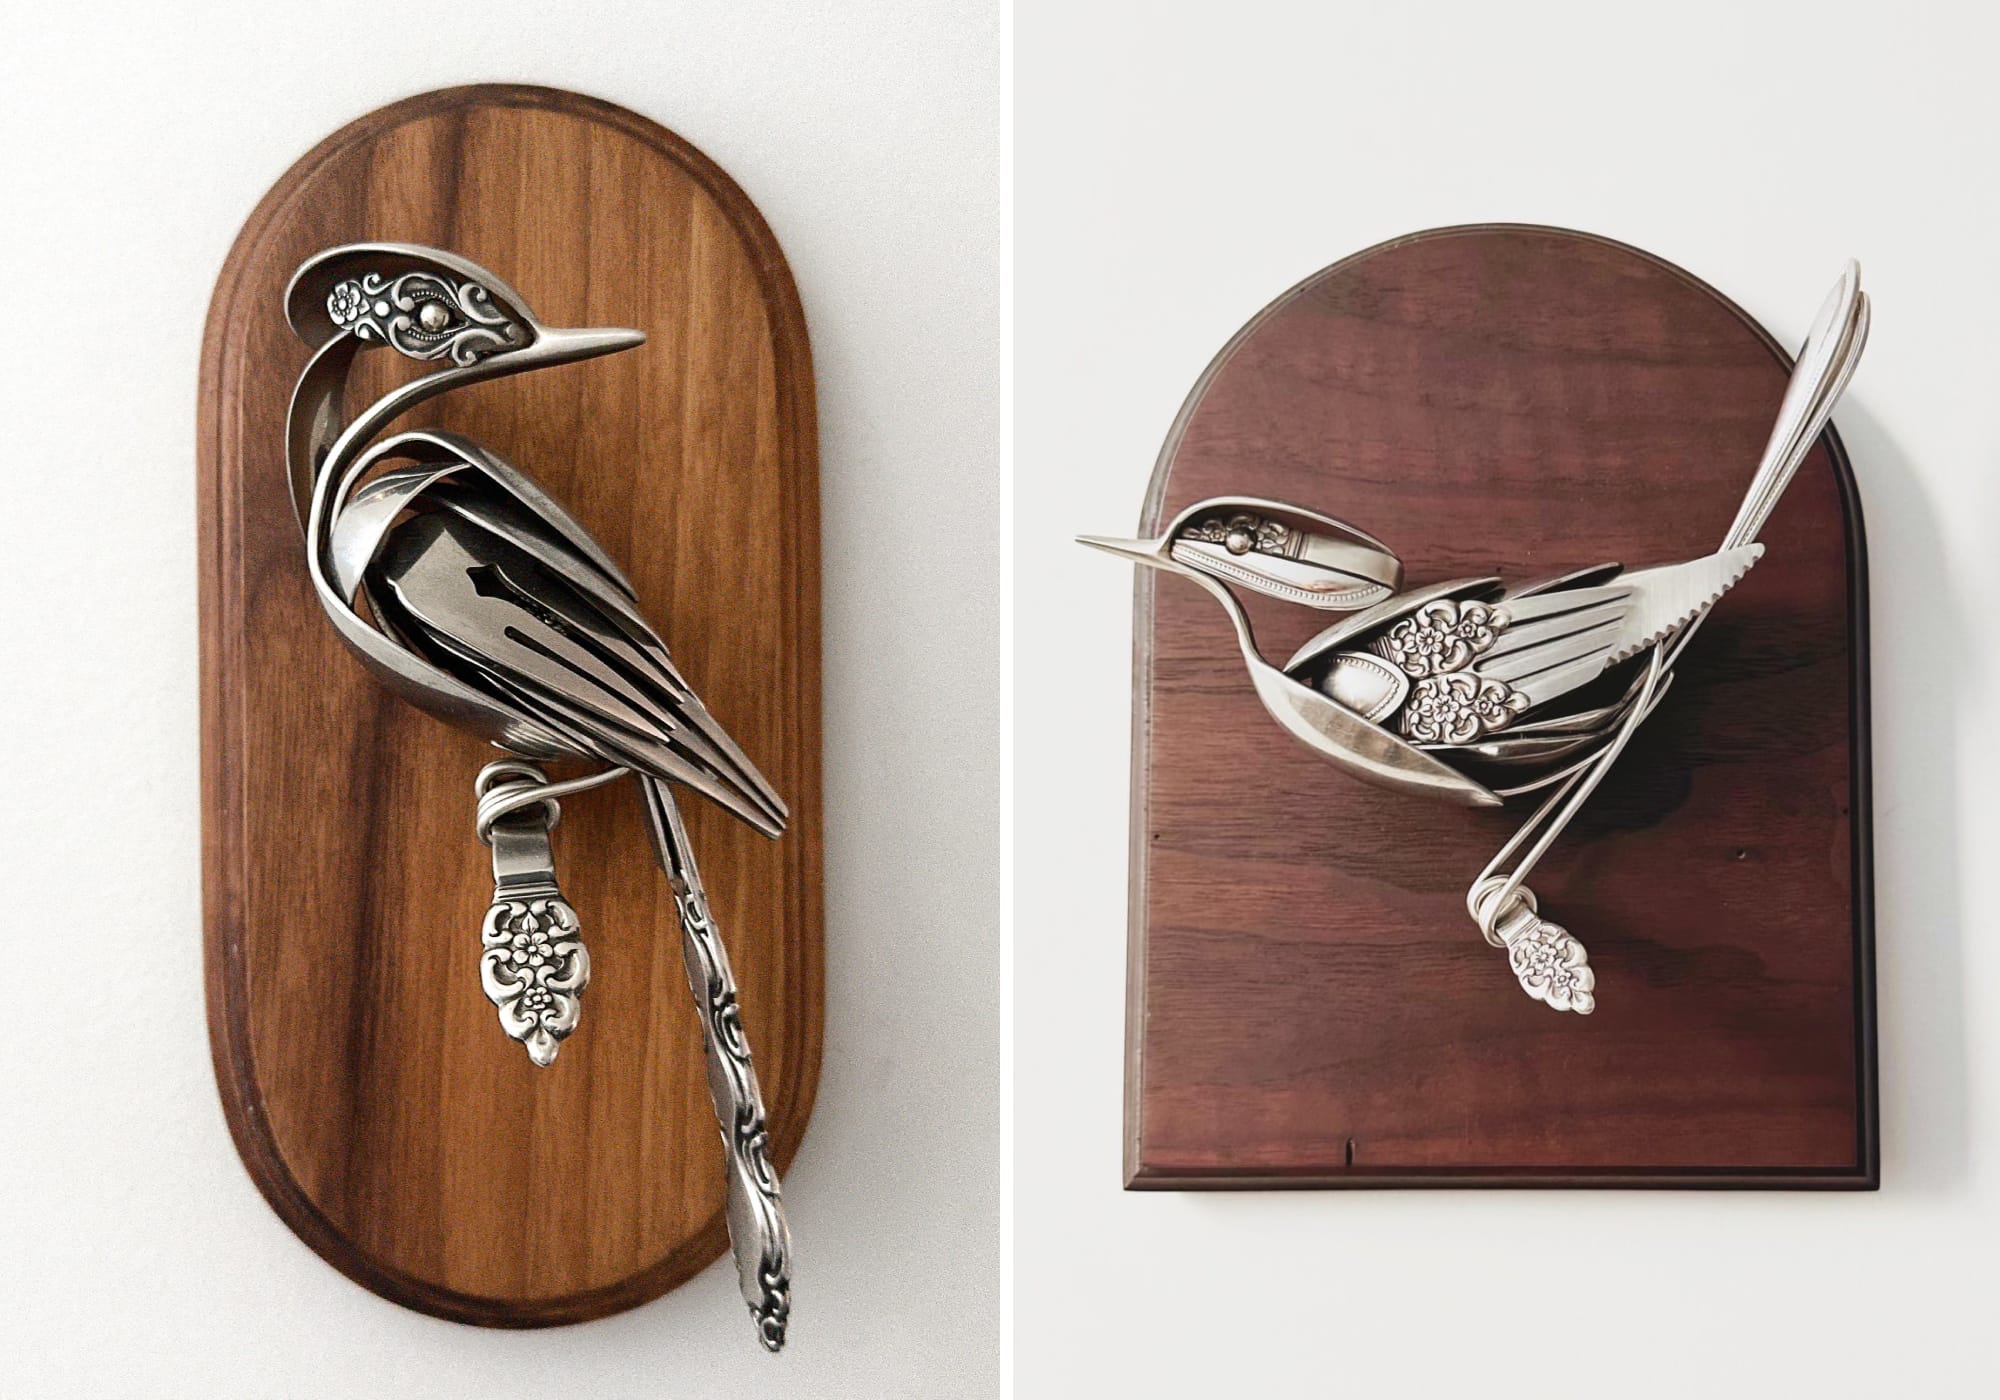 left: against an oval wooden frame background, a metal bird made from repurposed silverware perches. right: against an arched wooden frame background, a metal bird made from repurposed silverware perches